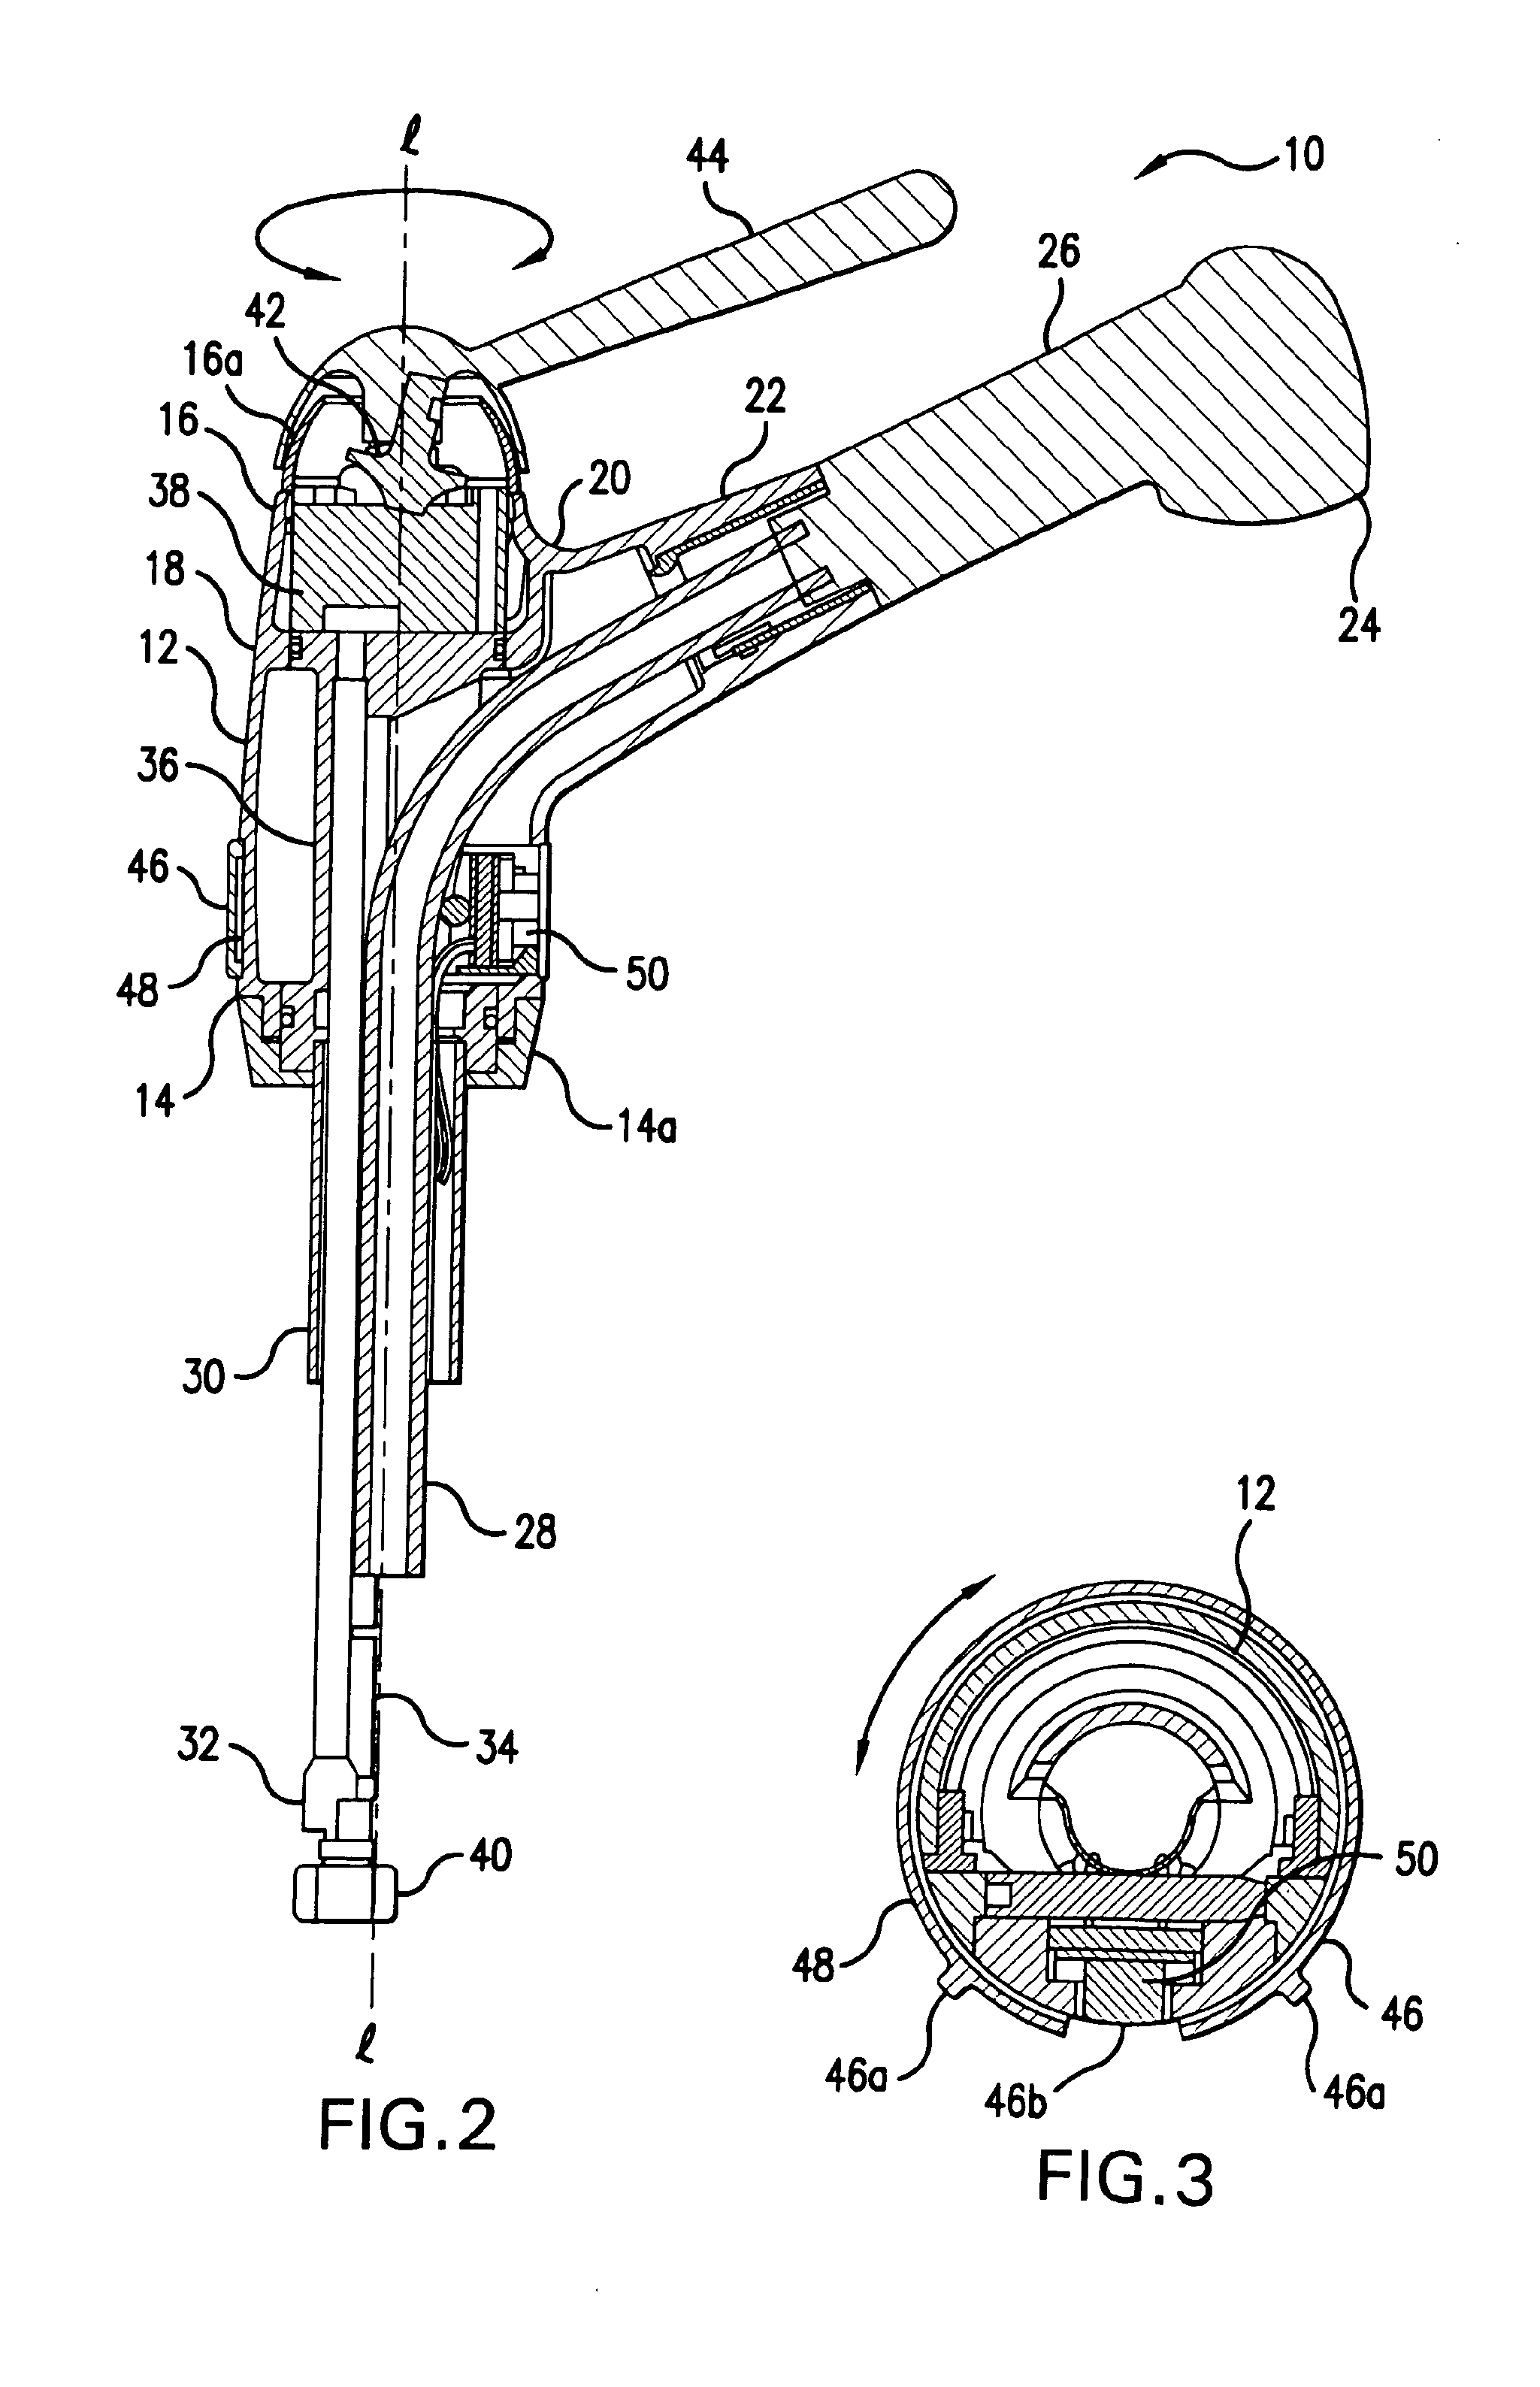 Proximity Faucet Having Selective Automatic and Manual Modes